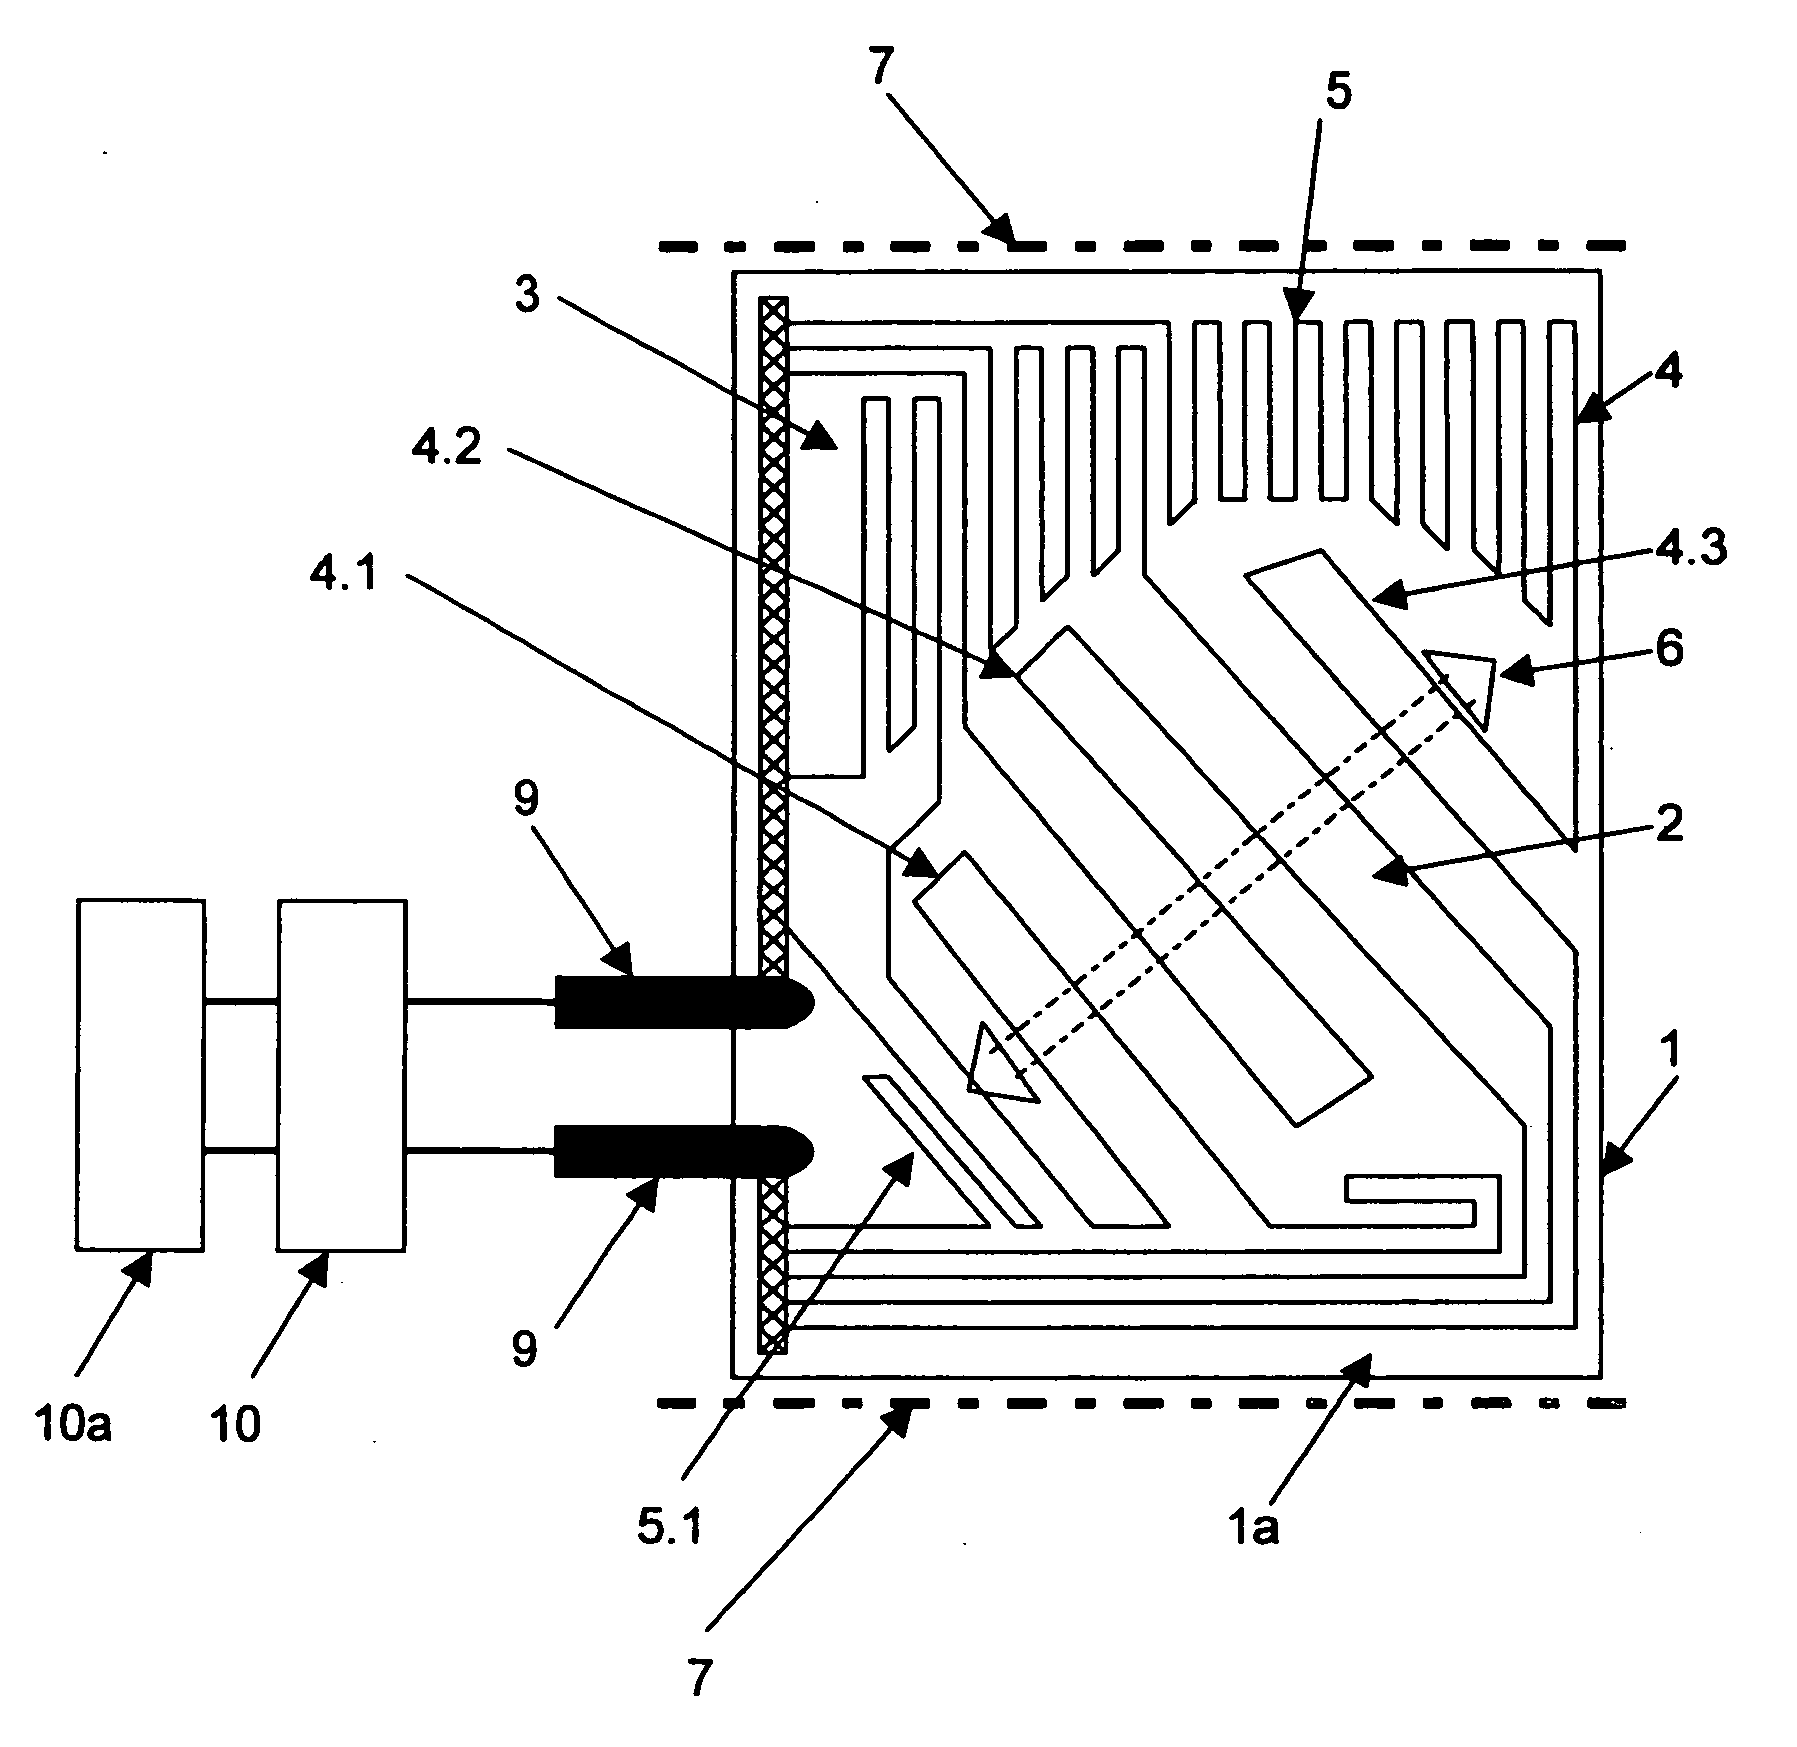 Heating element on the polymer inside surface of a motor vehicle front-end module/bumper in an operative connection to a radar transmitter/receiver unit